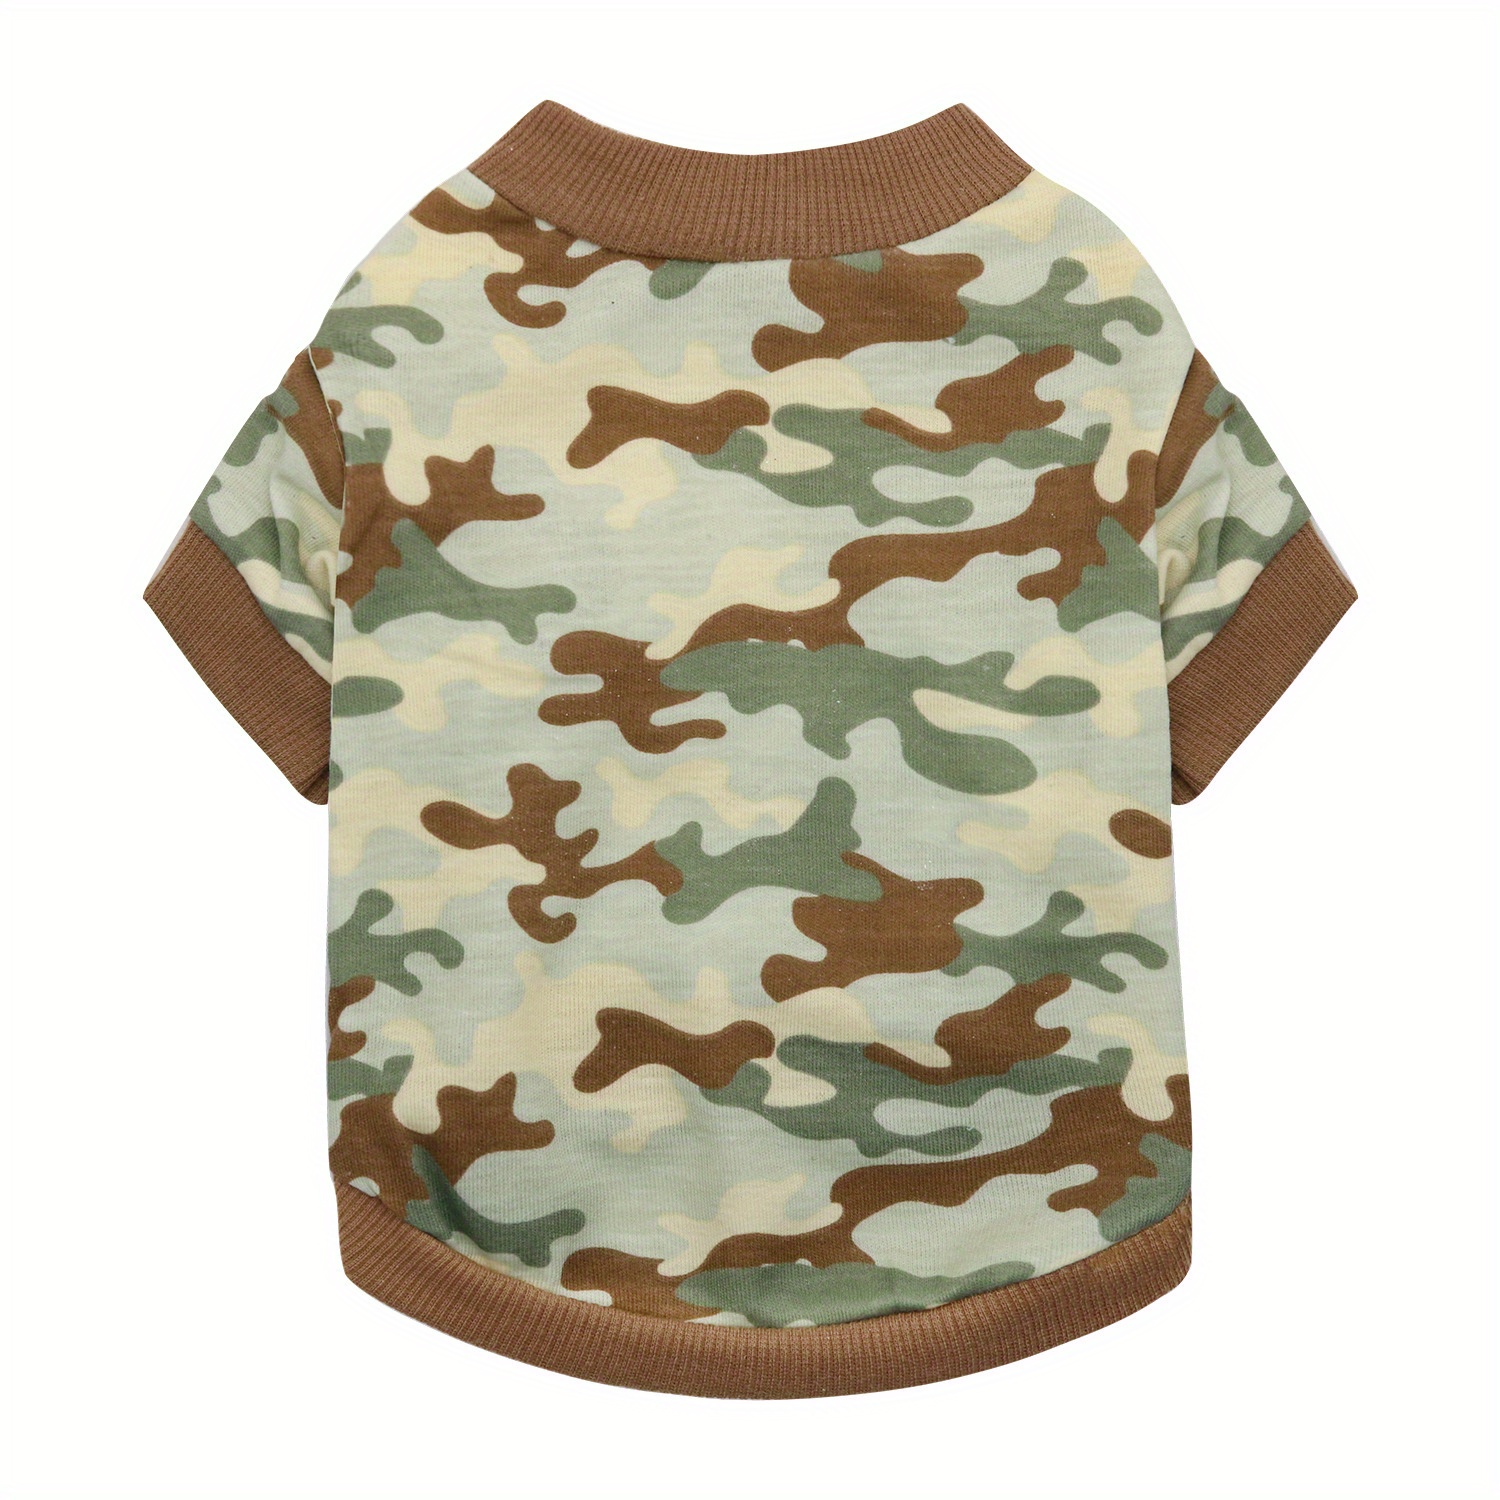 PAIDEFUL Army Green Dog Hoodie Hooded Tee Shirt Small Dog Clothes  Camouflage Soft Cotton Tank Tops Pet Clothing Boys Girls Camo S